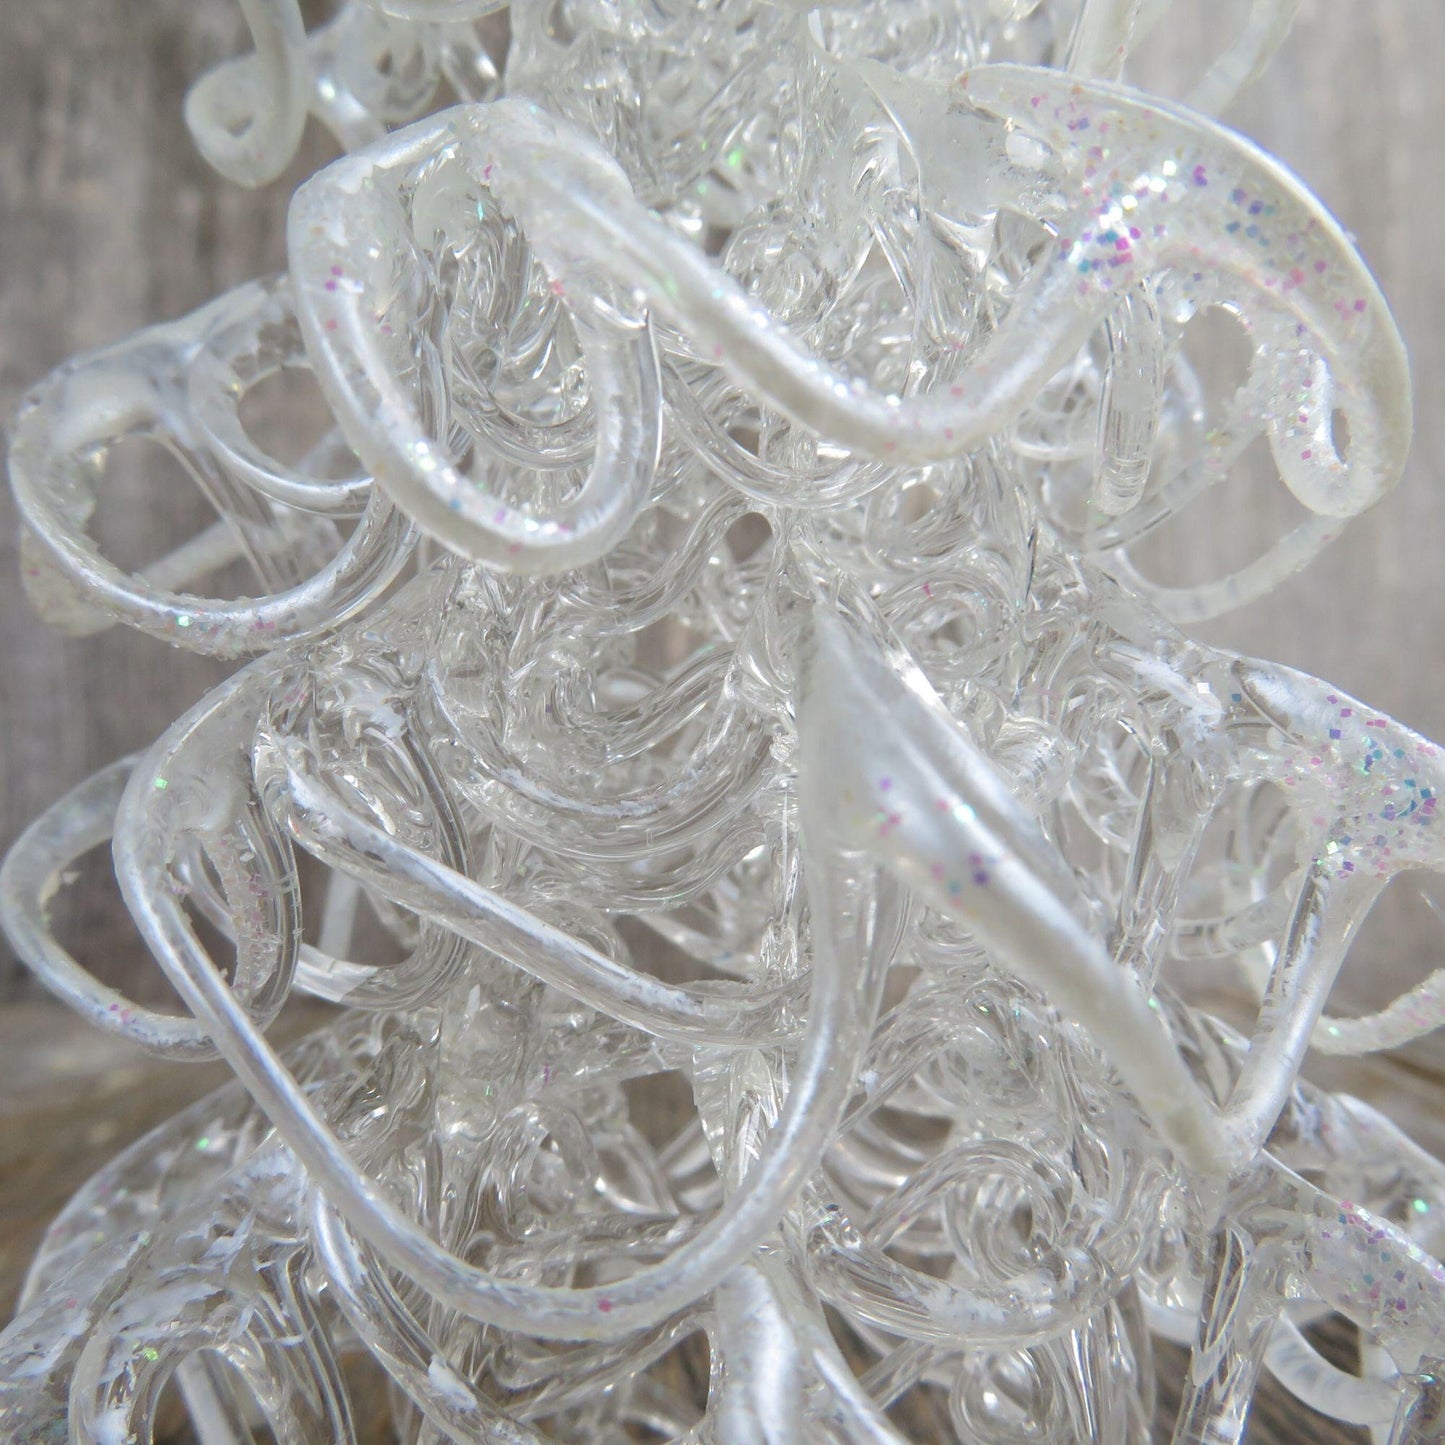 Vintage Tree Spun Glass Figurine Clear Crystal Christmas Glitter Painted White Village Decoration